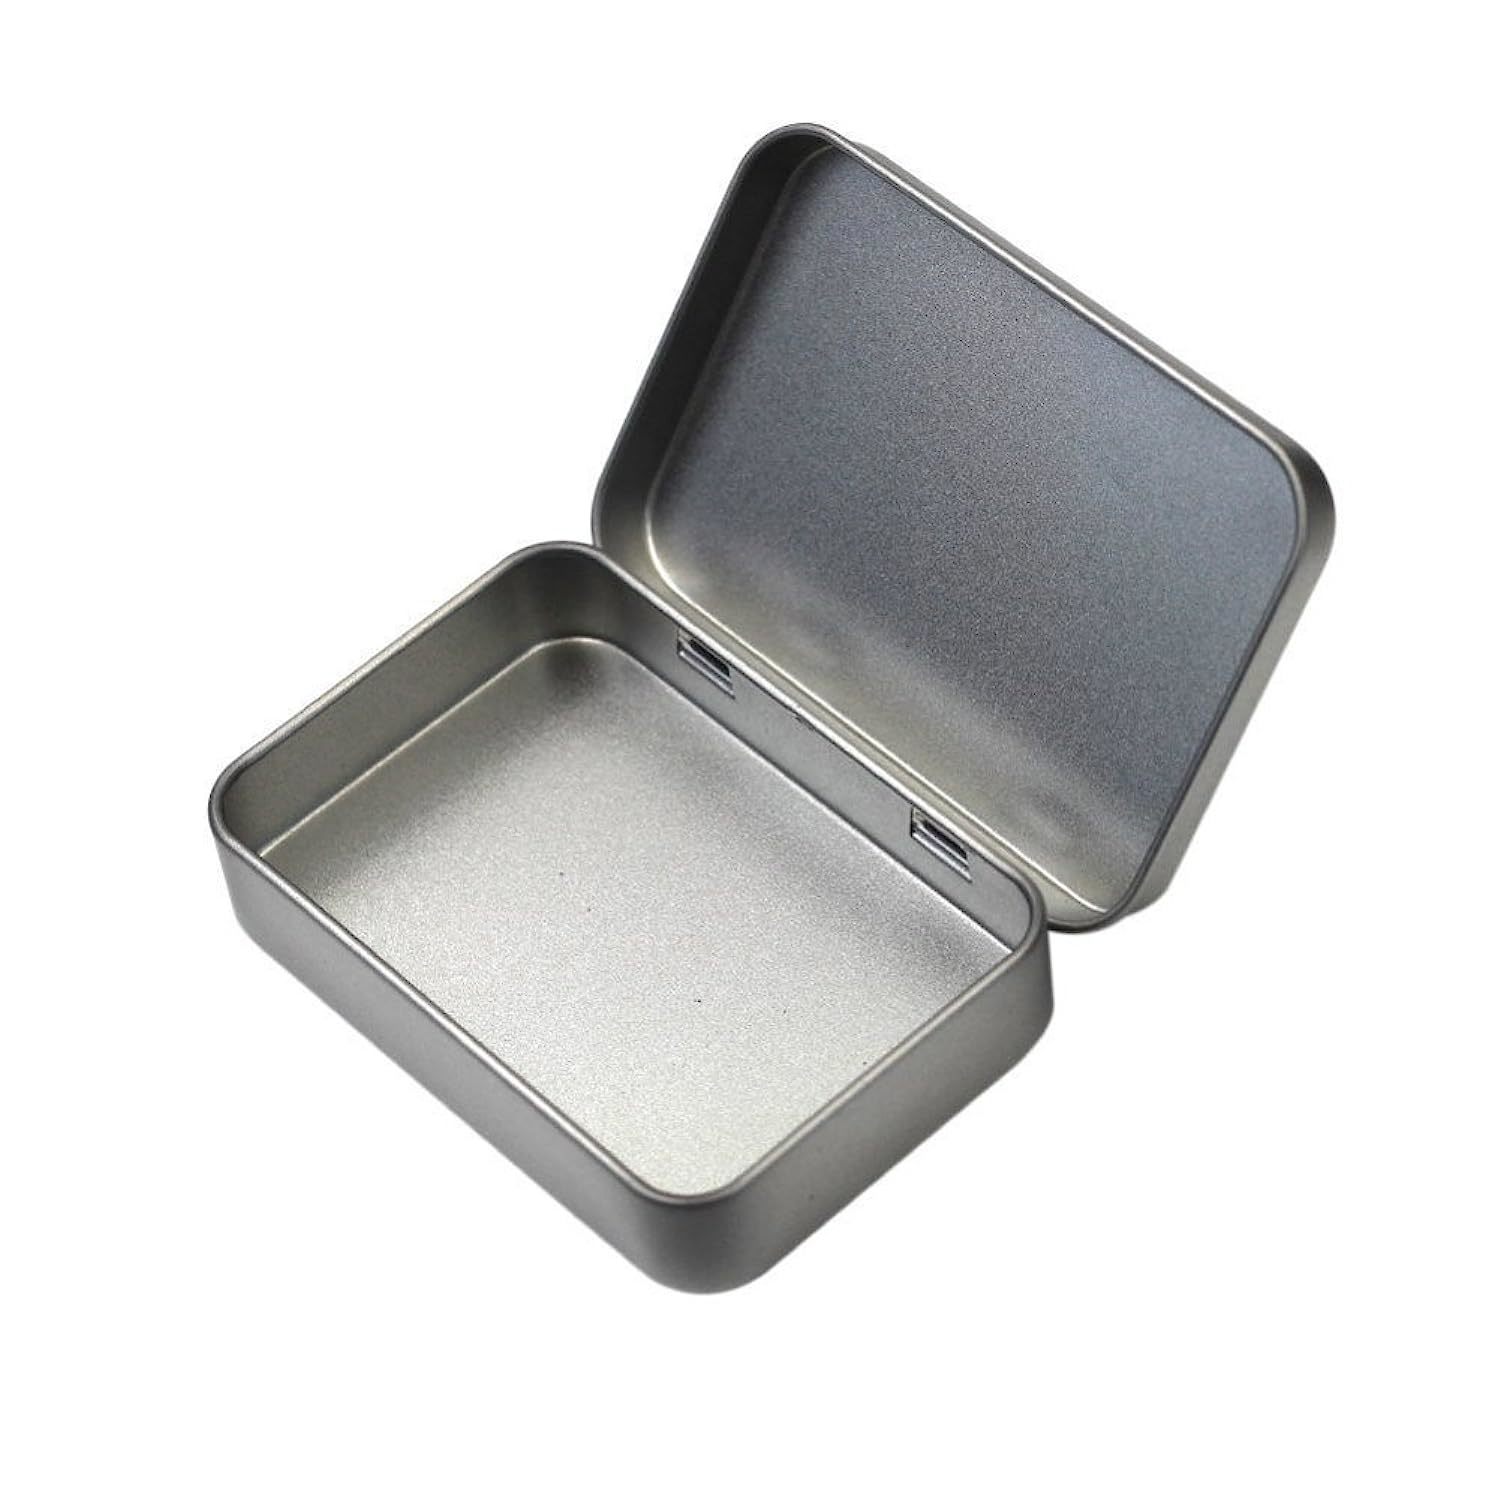 2 Pieces 4.5 X 3.3 X 0.86 Inch Rectangular Empty Hinged Tin Box Containers For H - $17.99